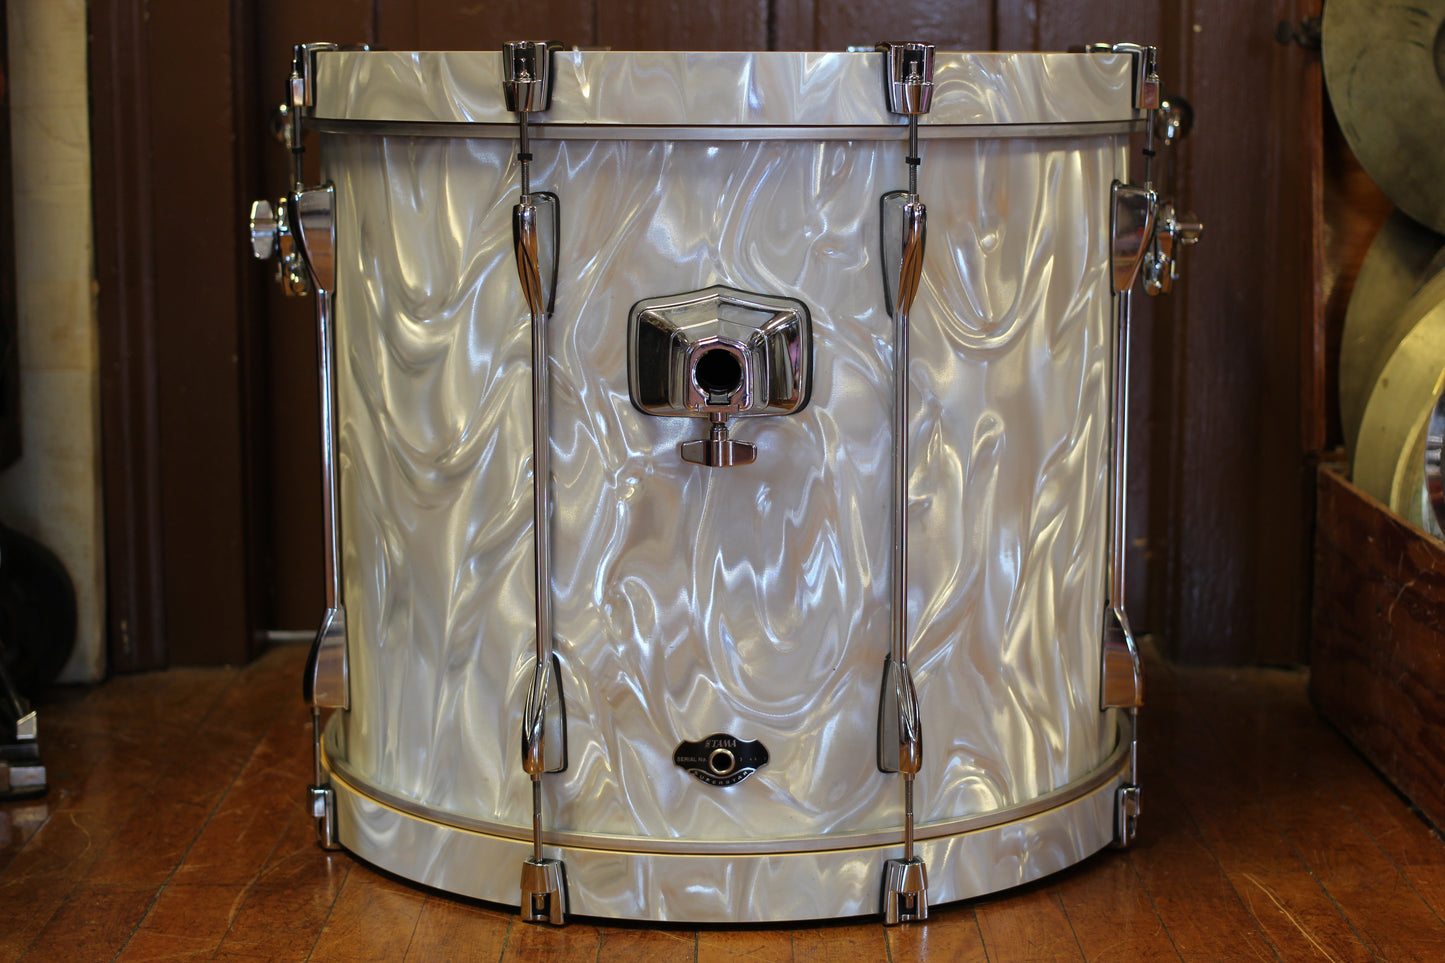 Used Tama Superstar Hyperdrive Kit in White Satin Flame 18x22 16x16 9x12